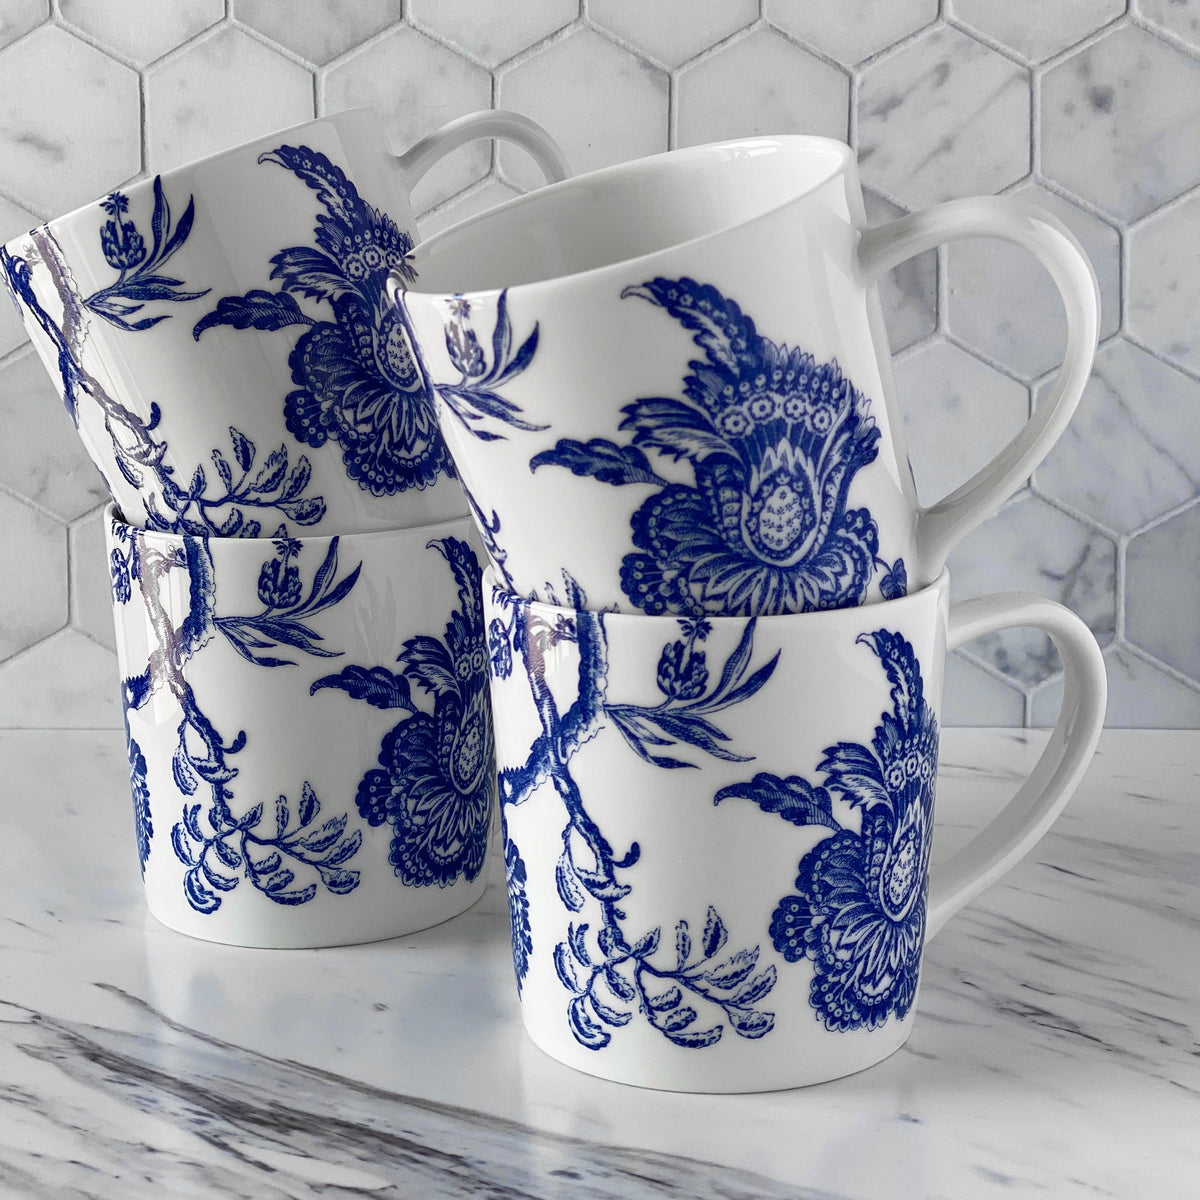 The set of 4 blue and white porcelain Arcadia Mugs from Caskata displayed in a bright marble kitchen.